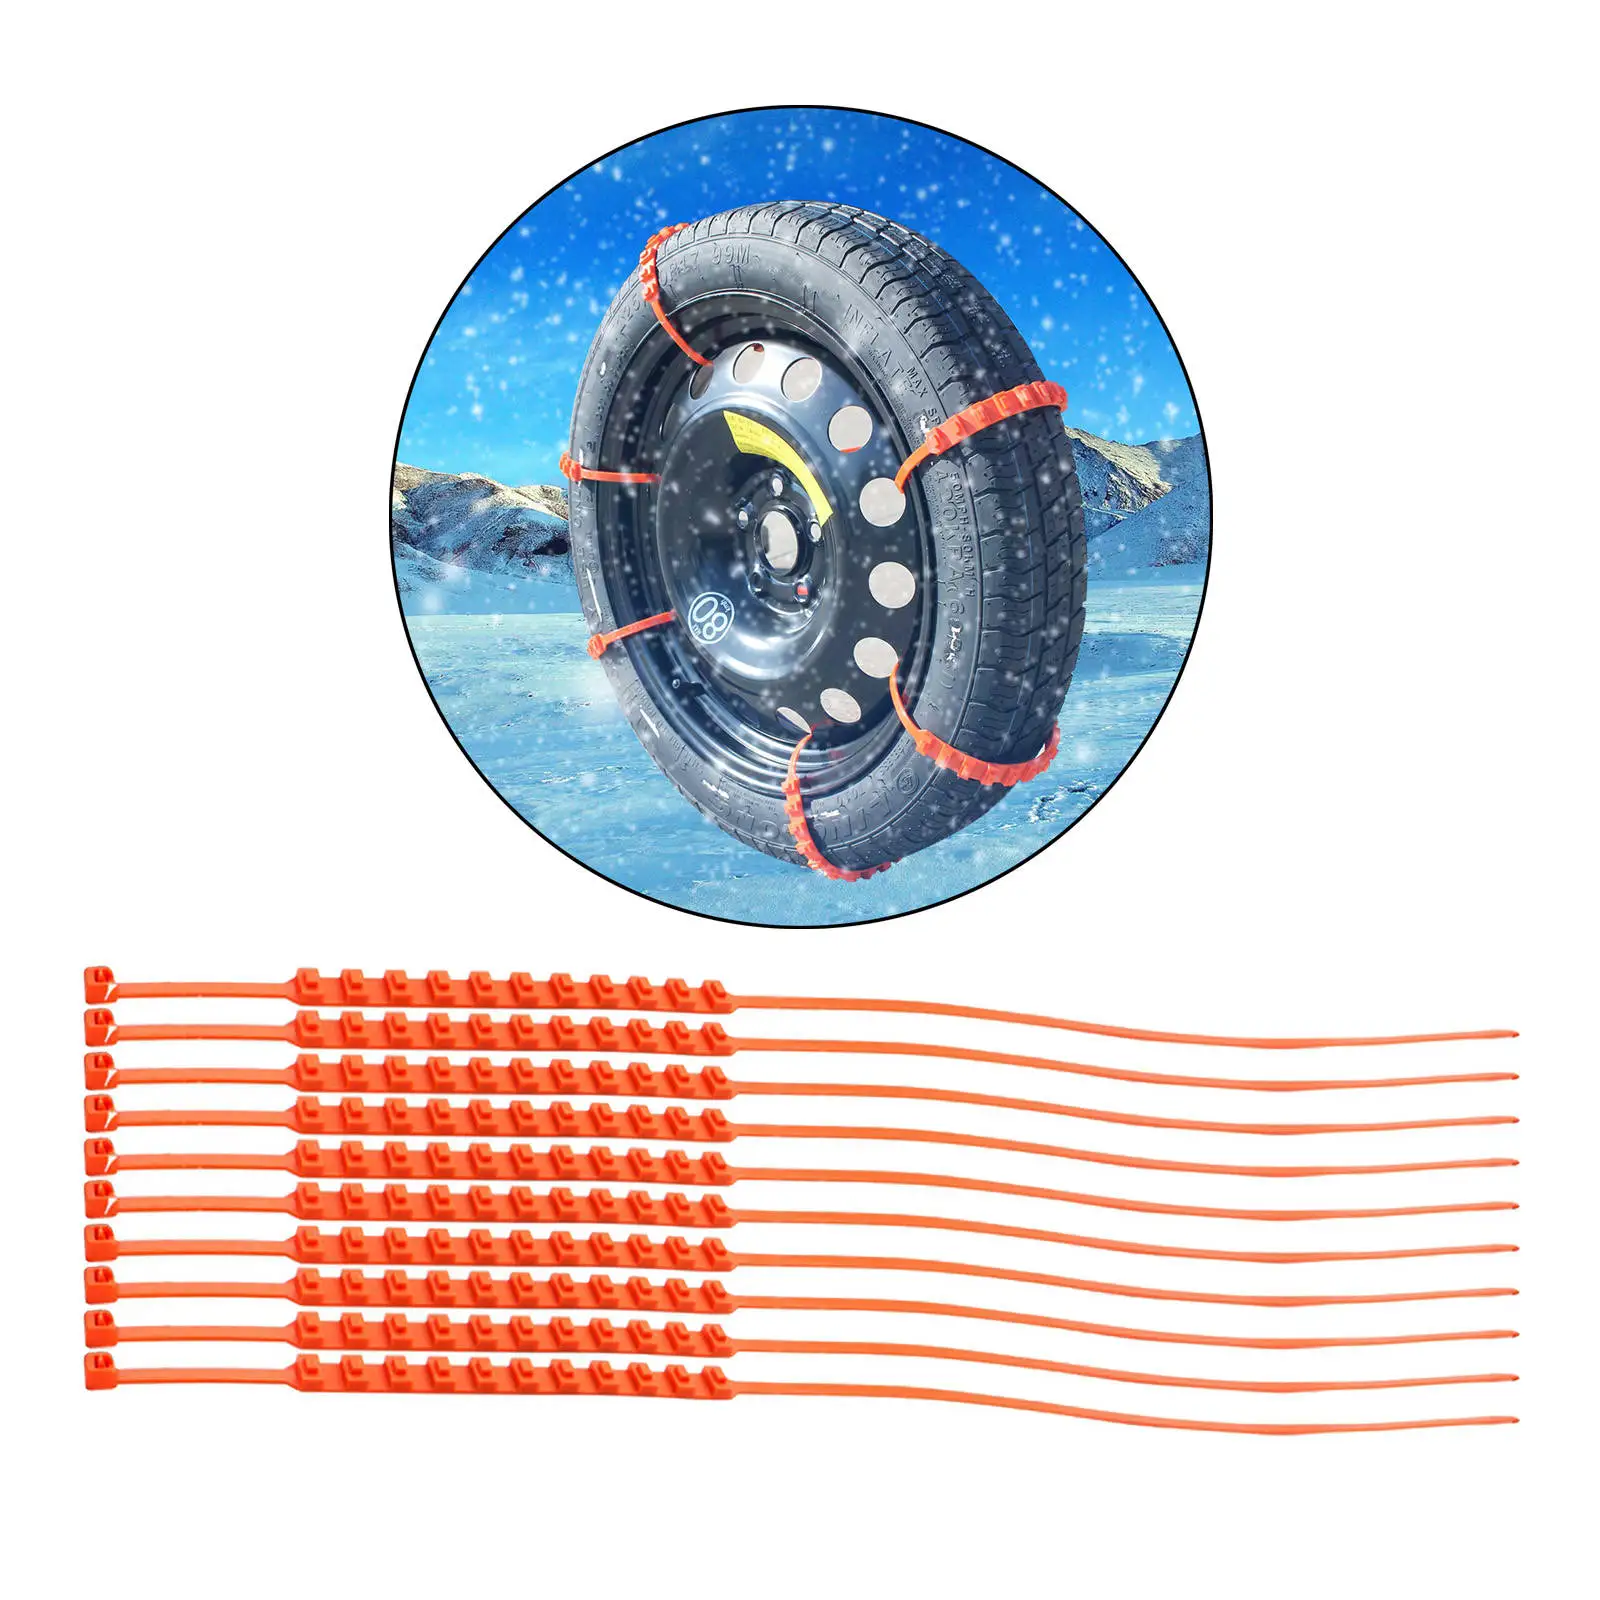 10x Snow Chains Tire Traction Chain Emergency Tire Straps for Cars SUV Truck ATV